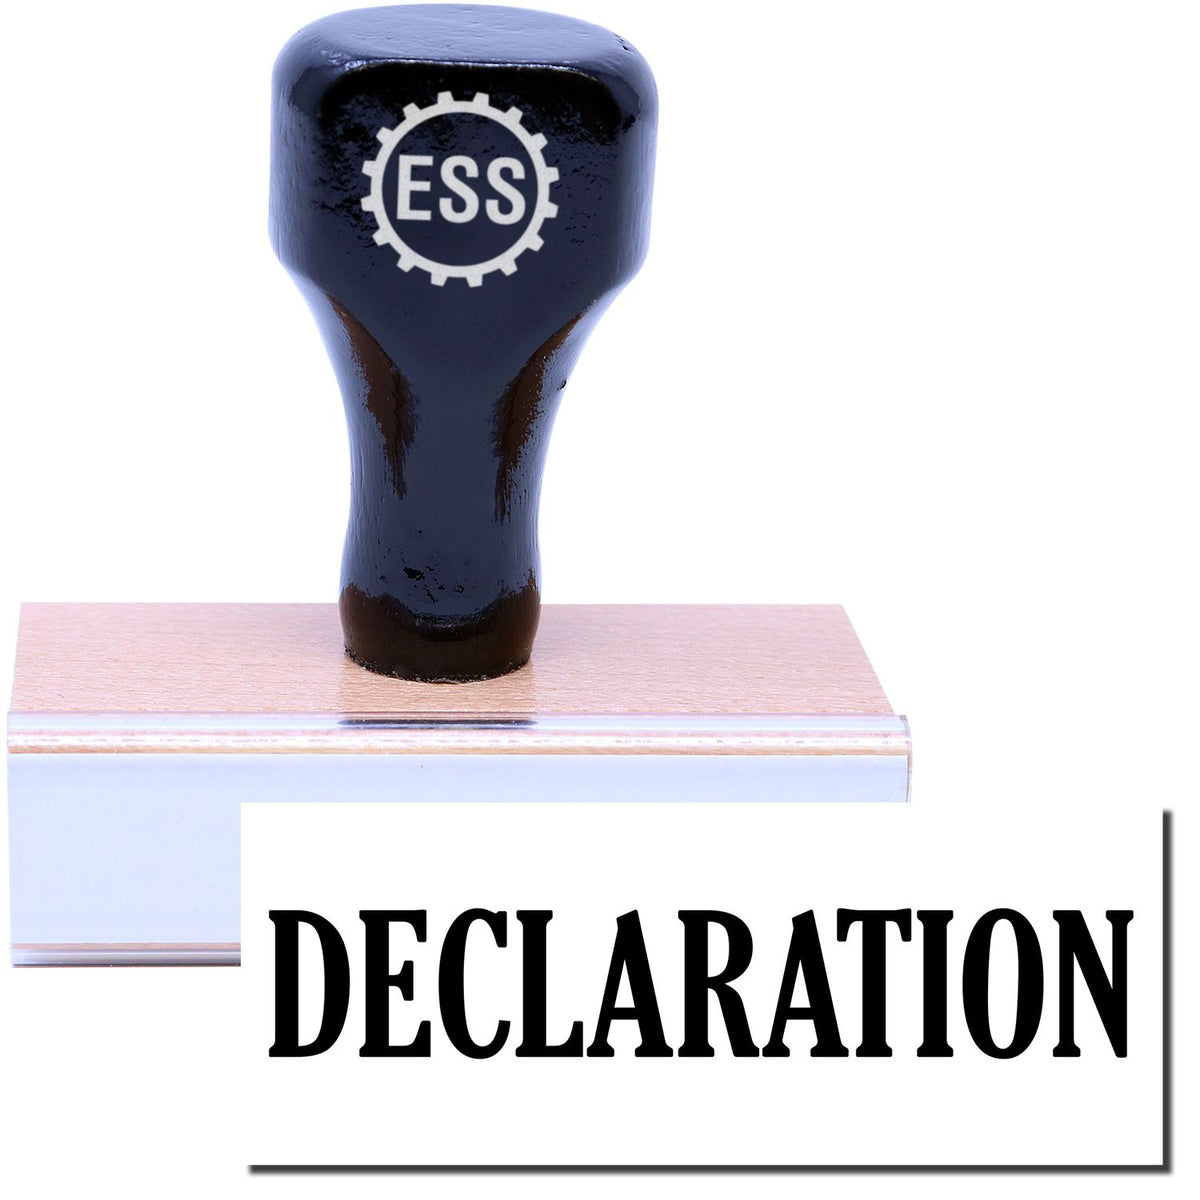 A stock office rubber stamp with a stamped image showing how the text &quot;DECLARATION&quot; in a large font is displayed after stamping.